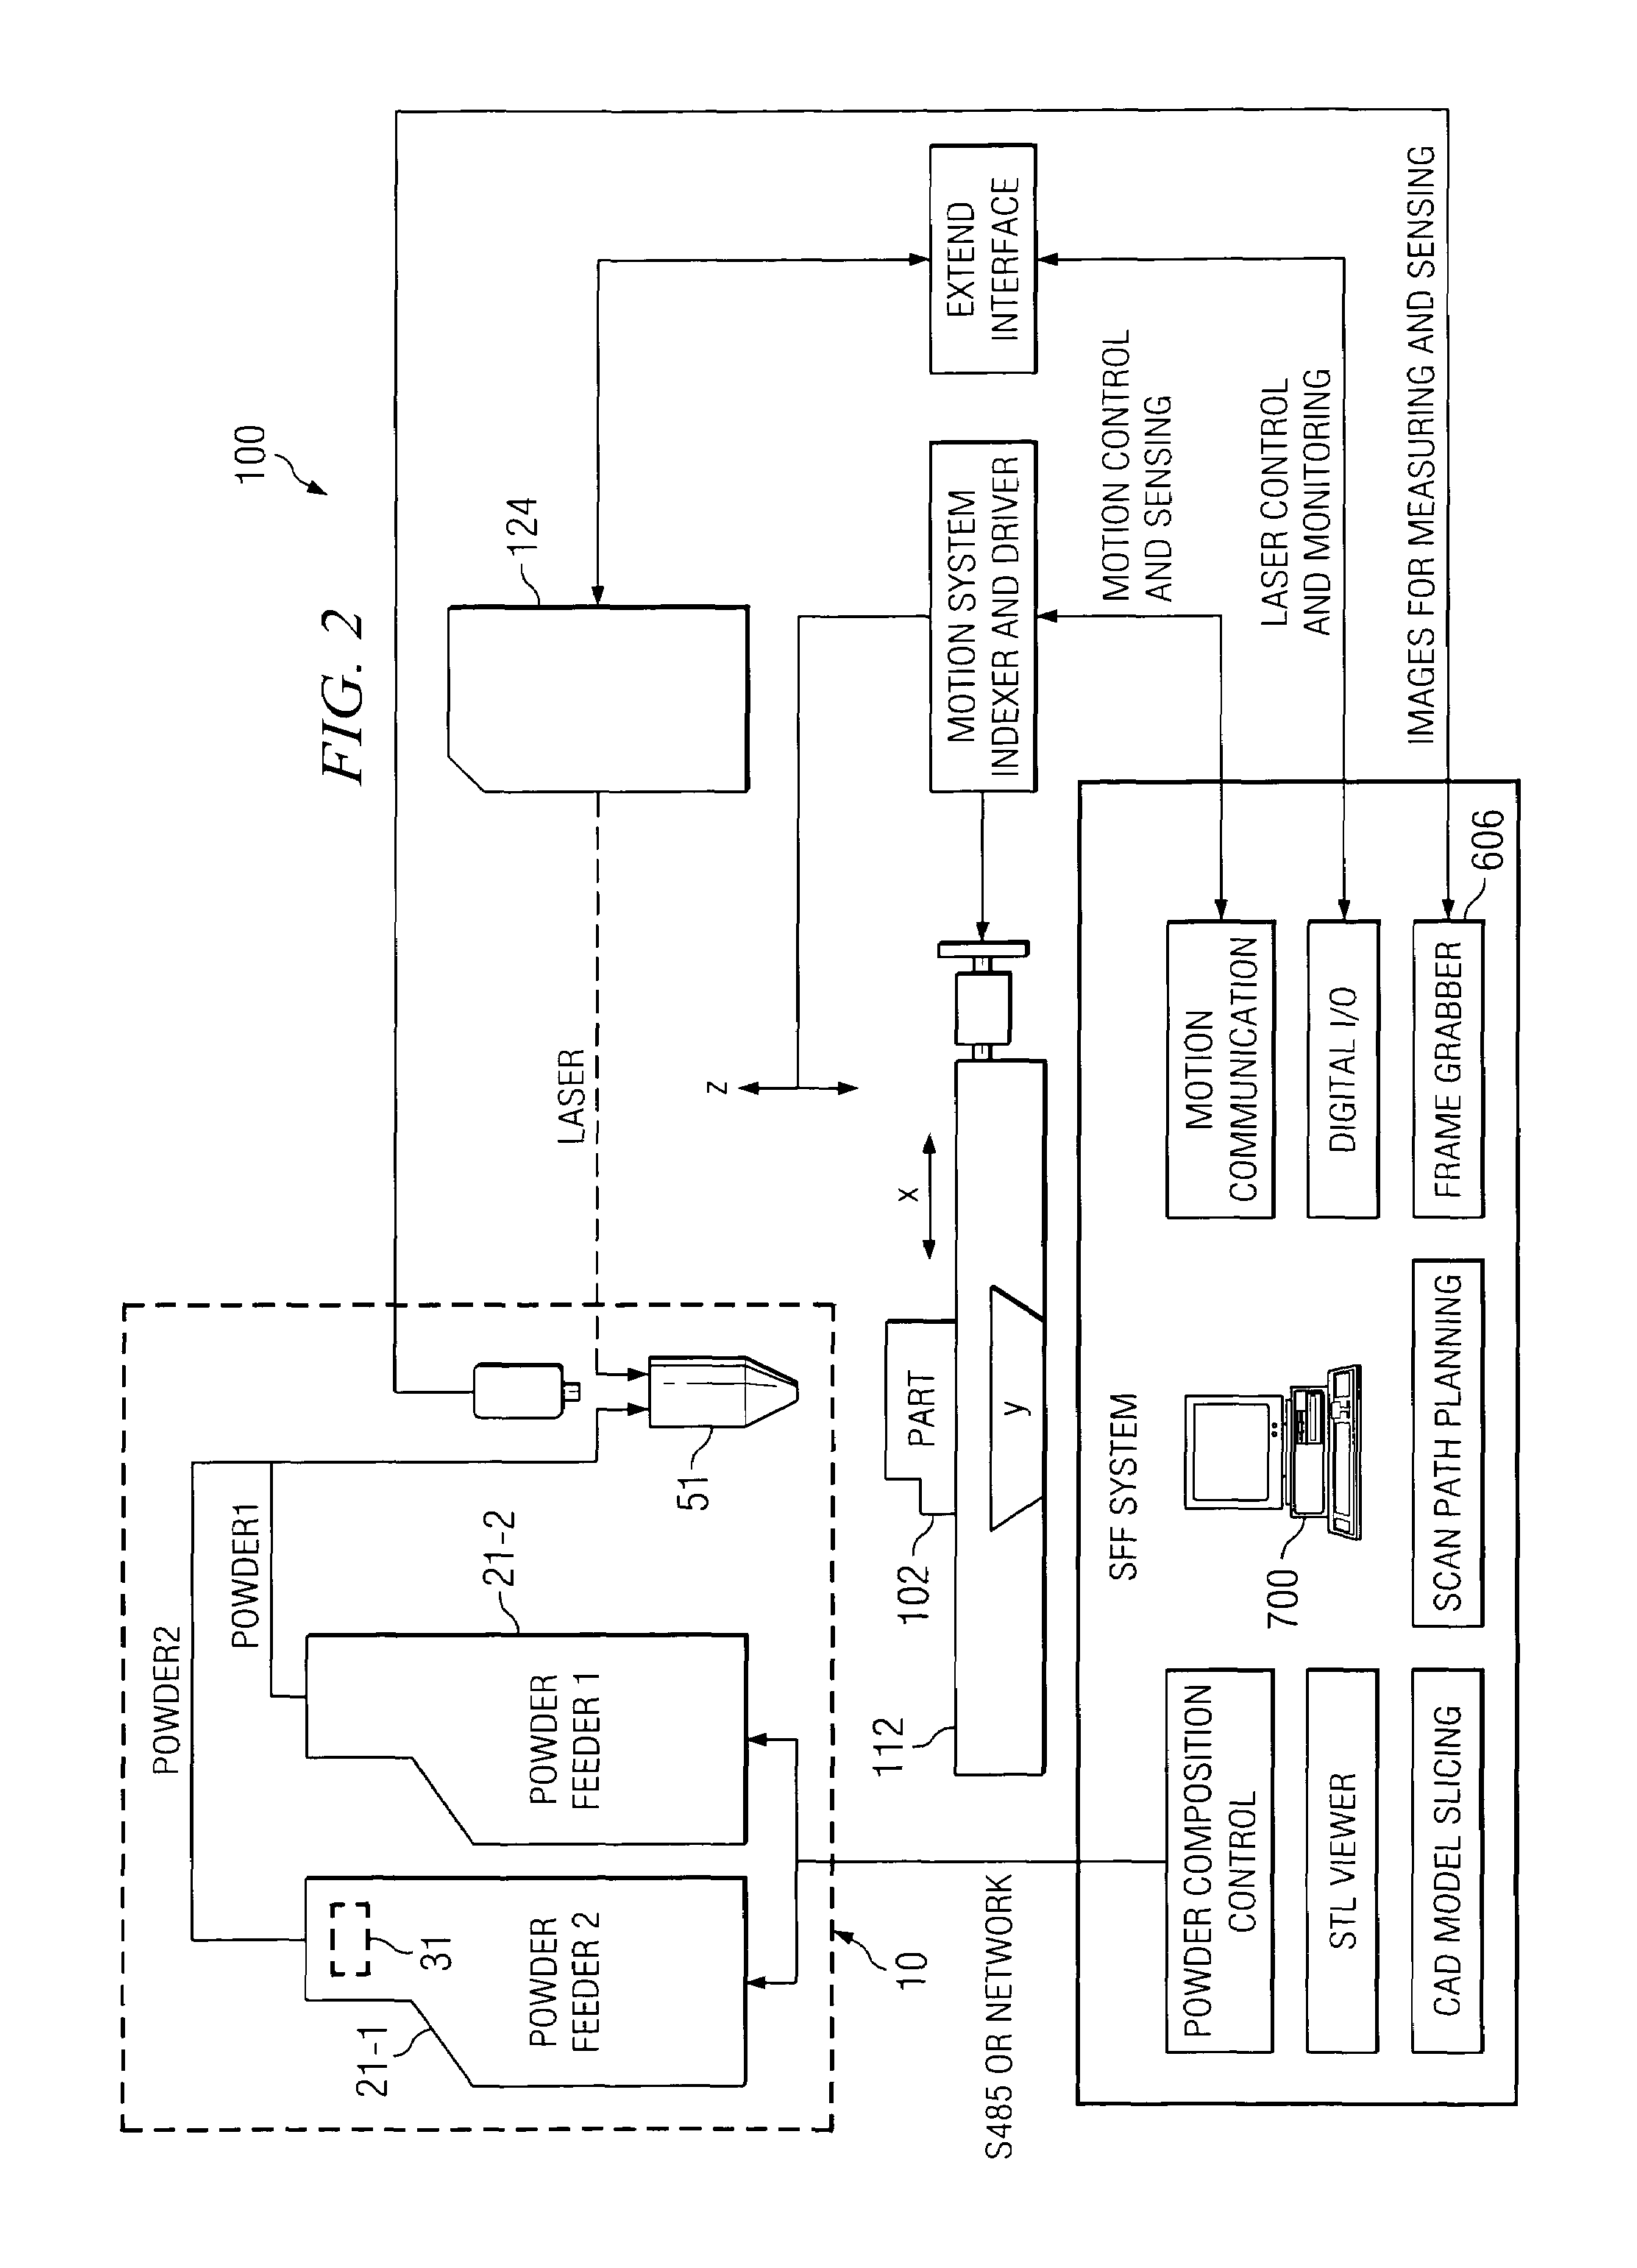 Powder delivery system and method